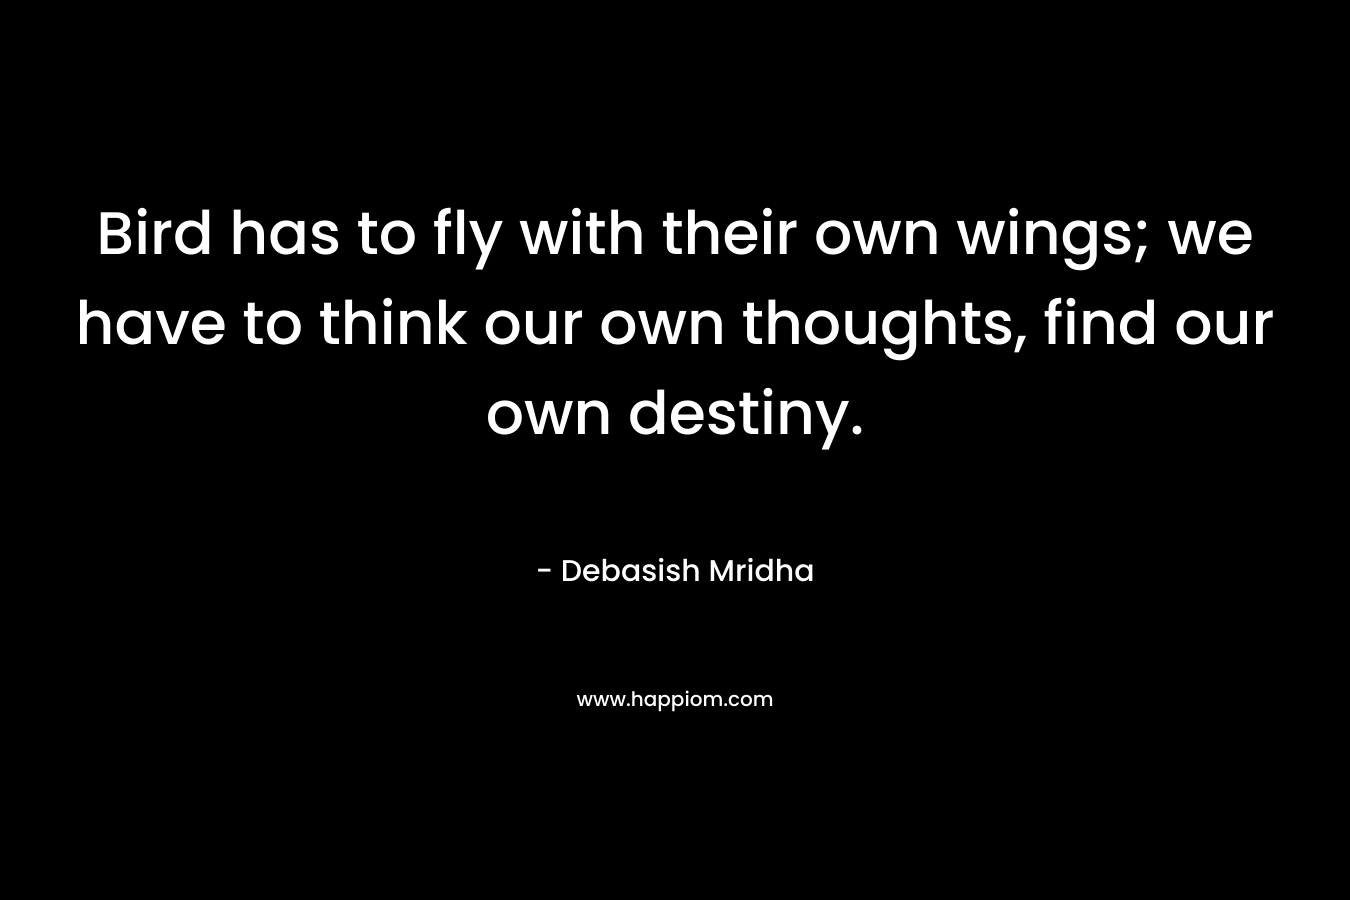 Bird has to fly with their own wings; we have to think our own thoughts, find our own destiny.